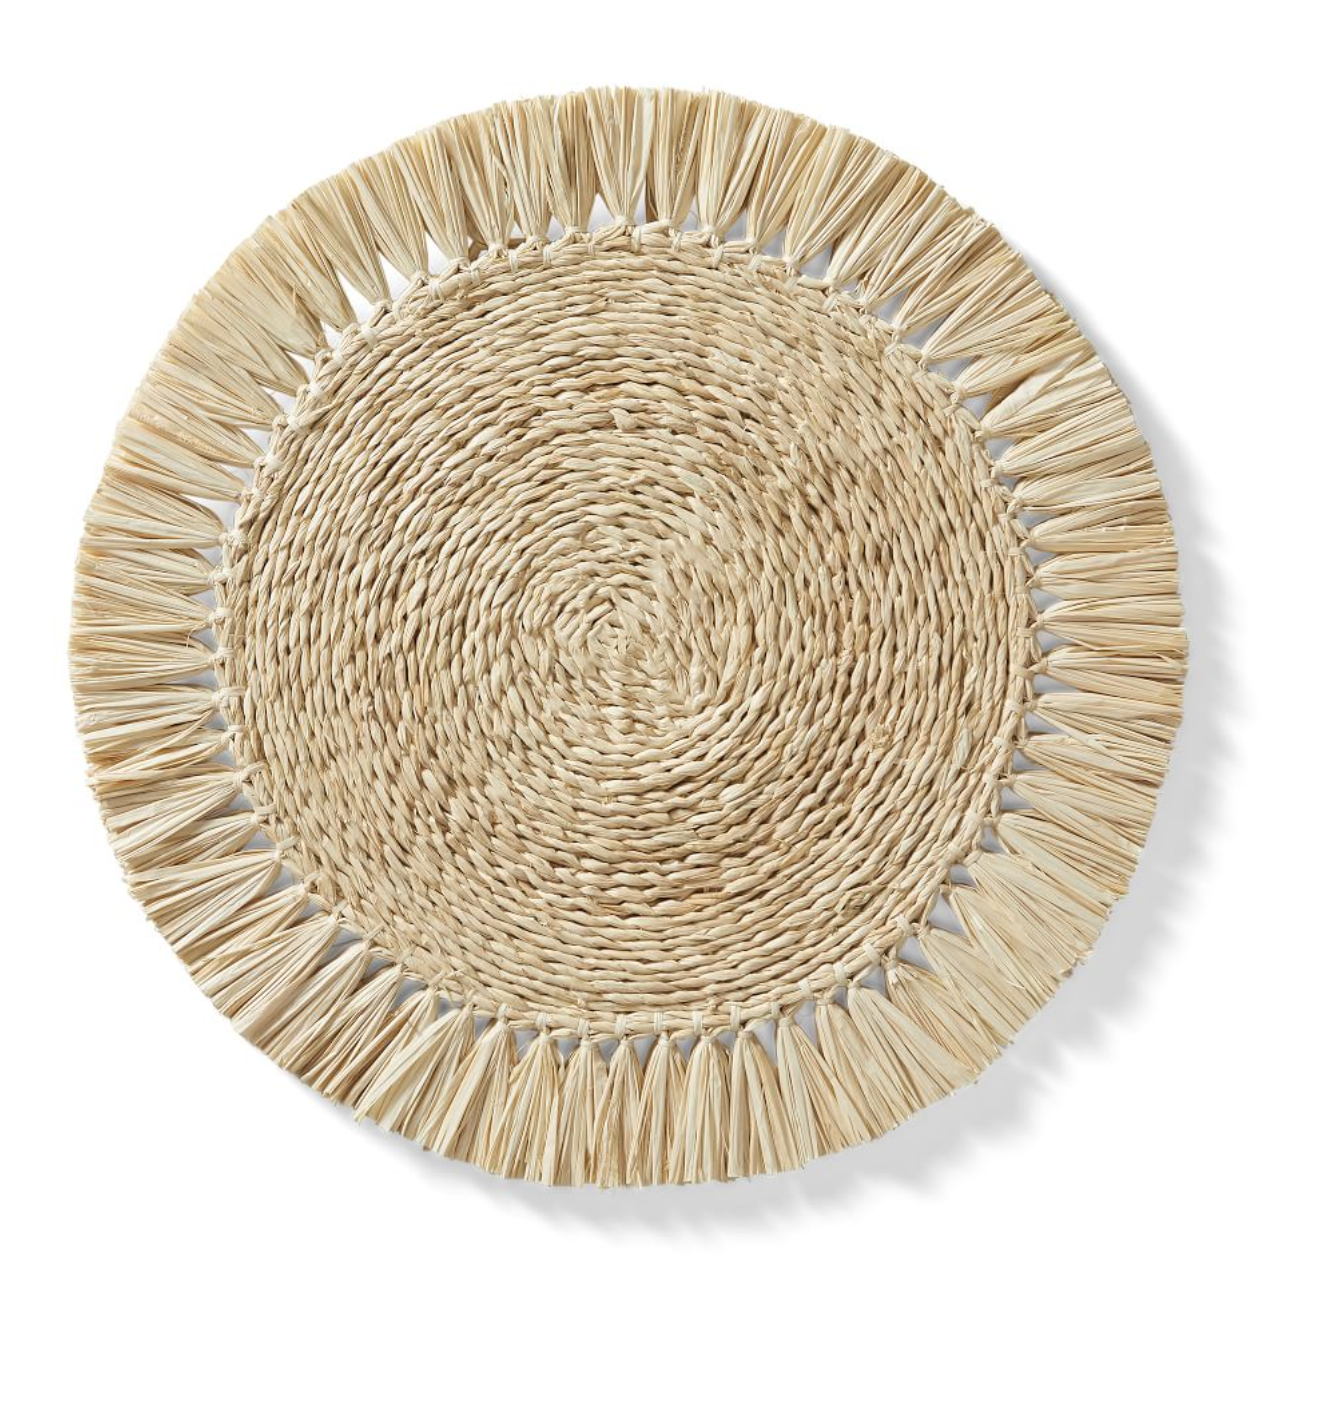 Raffia Placemat with Fringe Set of 4